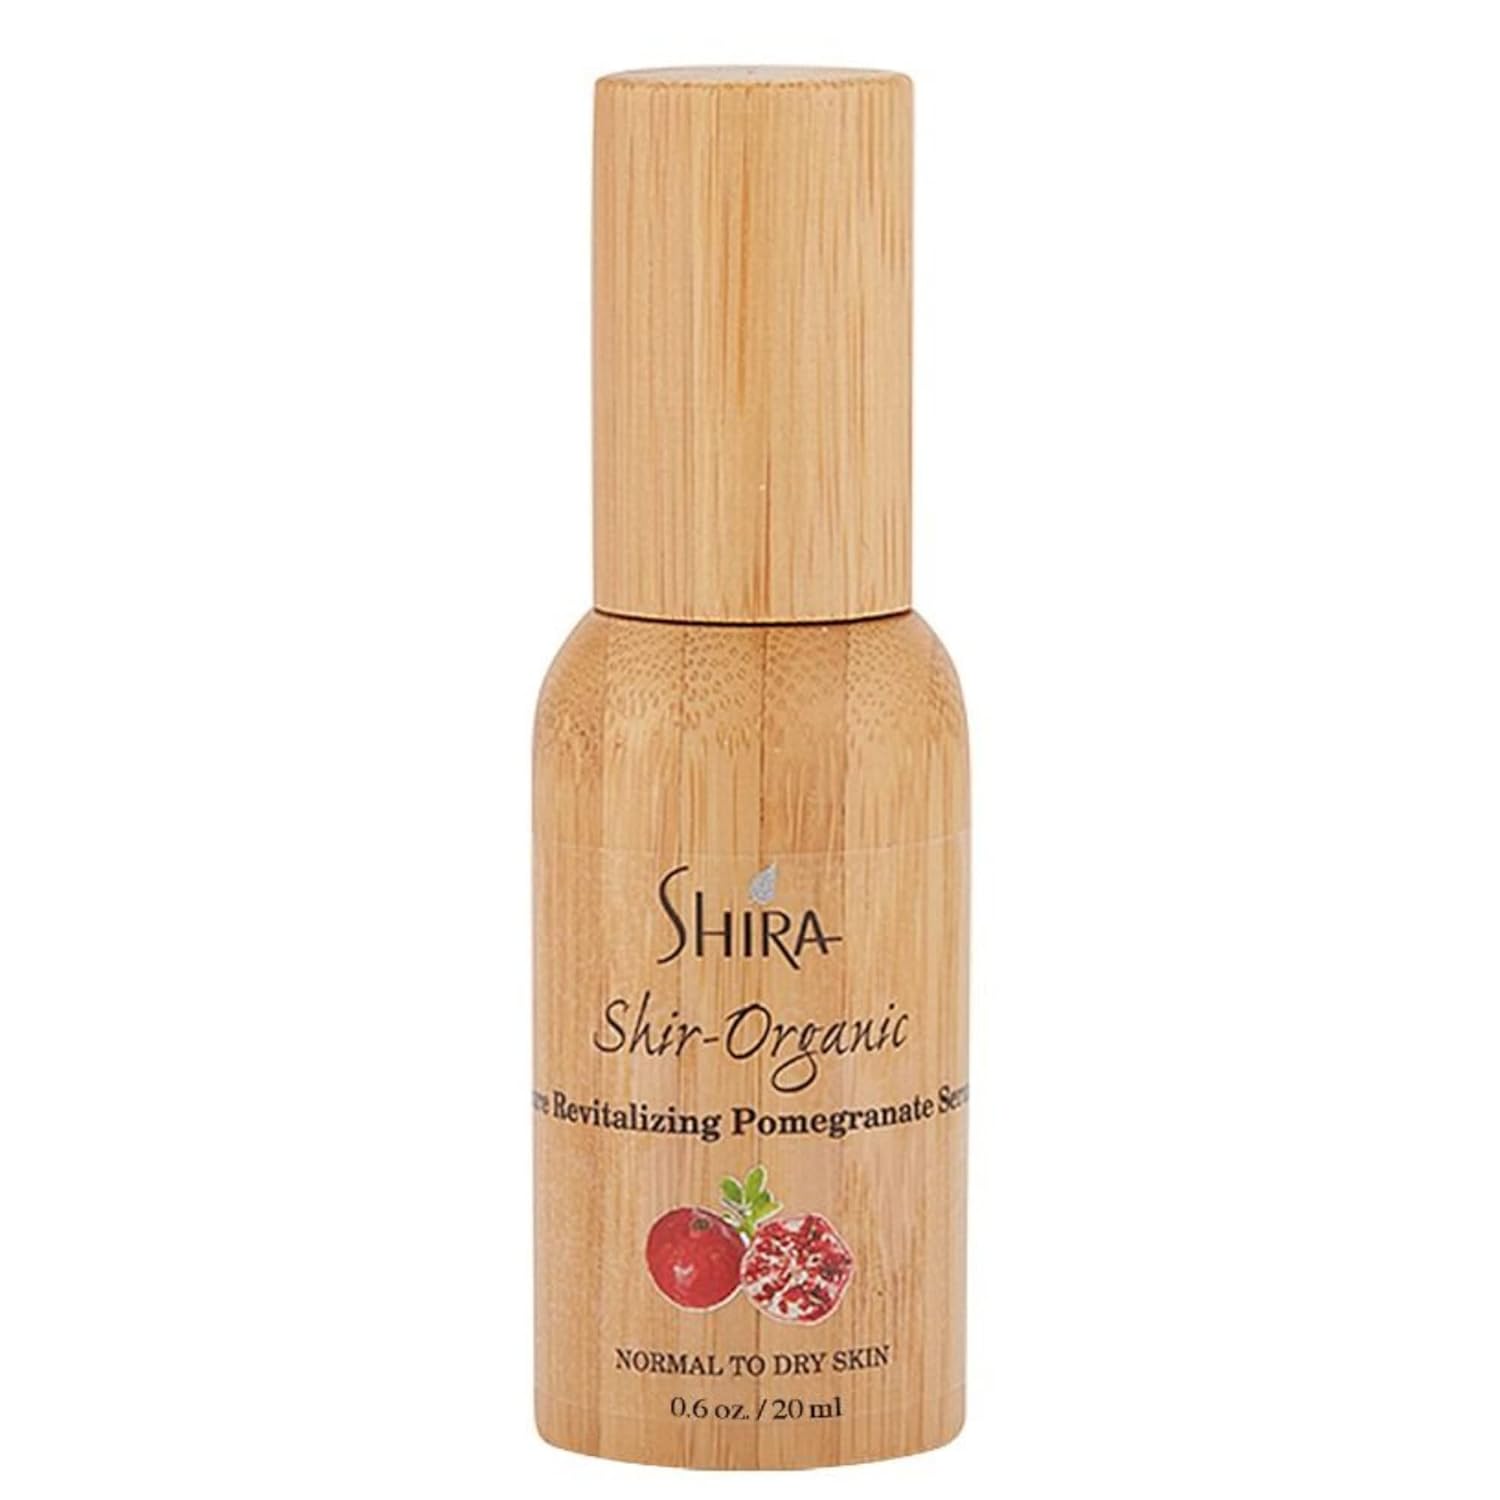 Shir-Organic Pure Pomegranate Serum for Face Provides Healthy Skin Tone and Texture Effective Solution for Mature and Aging Skin For Normal to Dry Skin Type. (20 )